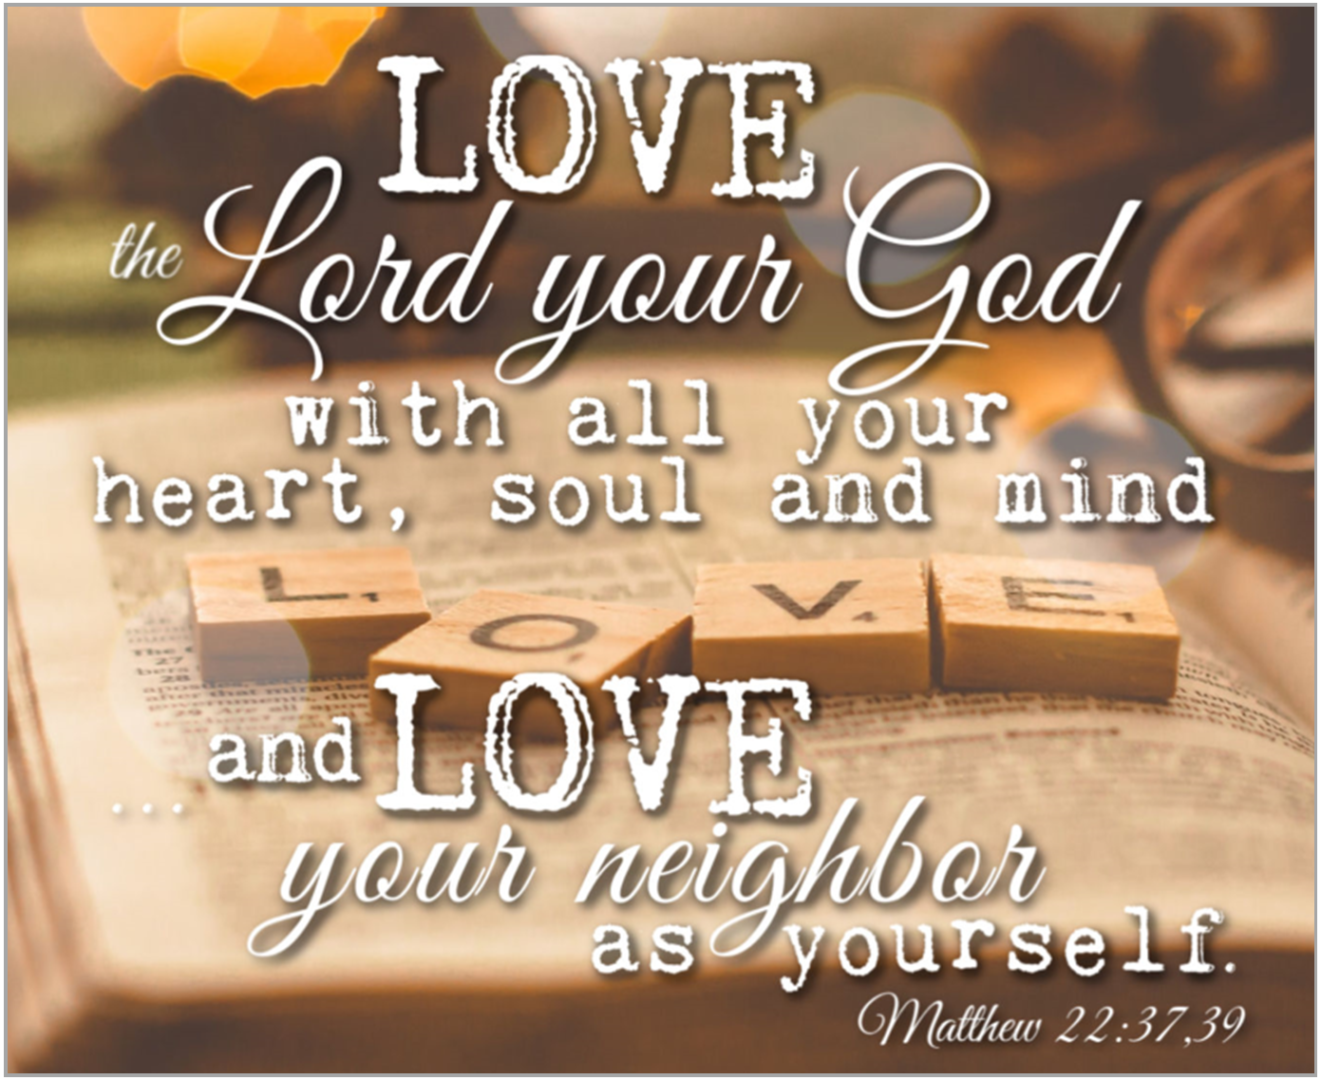 Matthew 22:37-39 Jesus said, “'Love the Lord your God with all